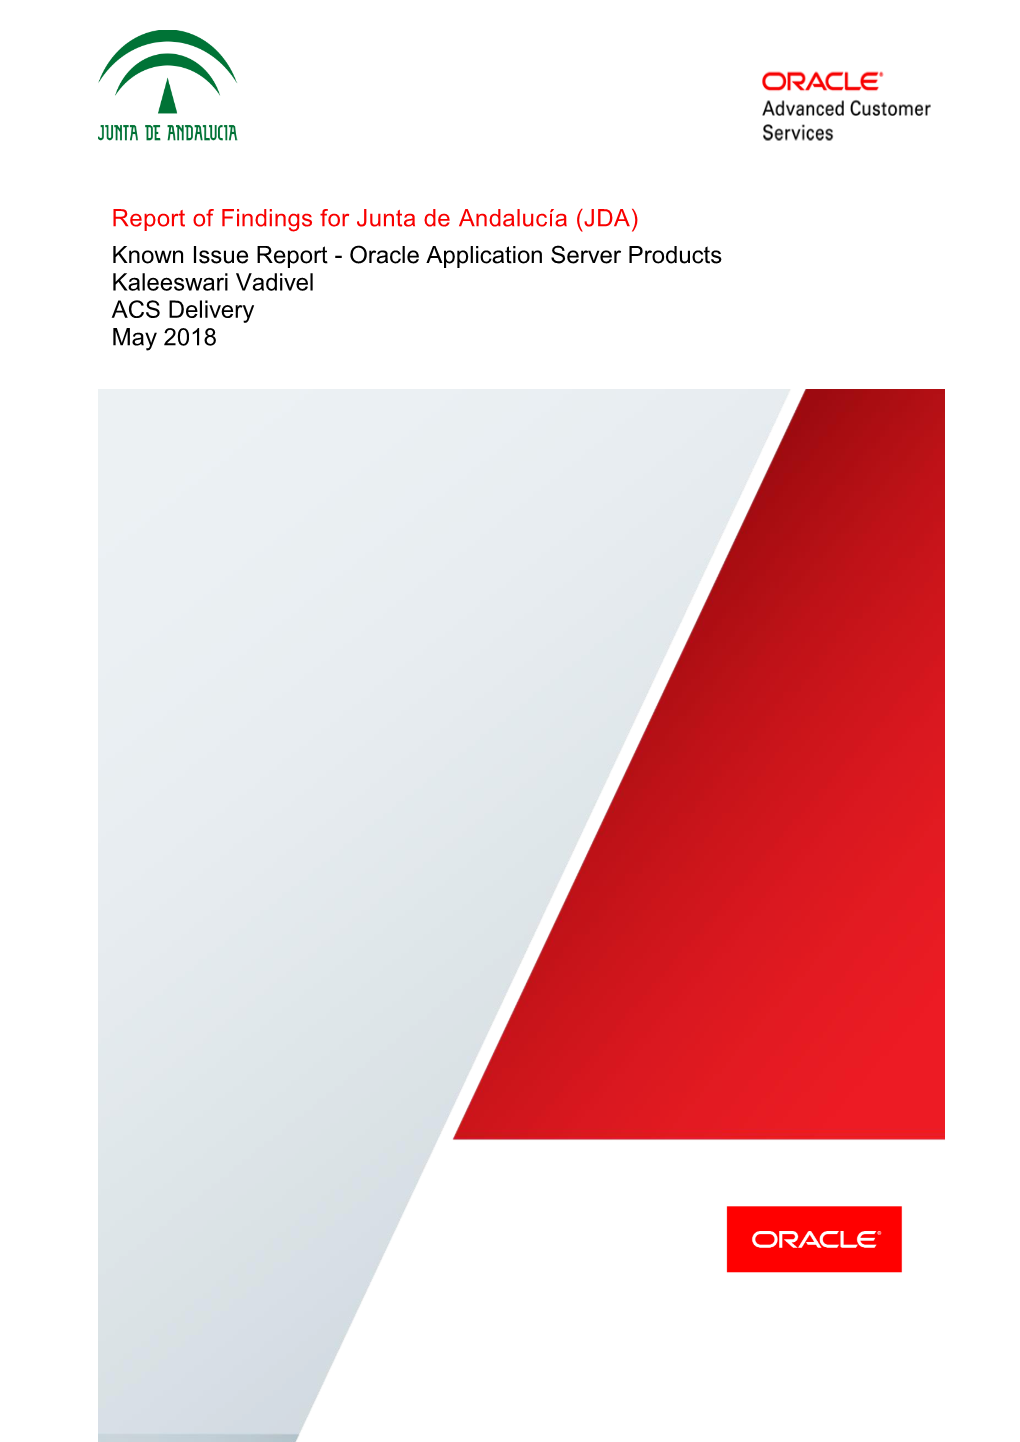 (JDA) Known Issue Report - Oracle Application Server Products Kaleeswari Vadivel ACS Delivery May 2018